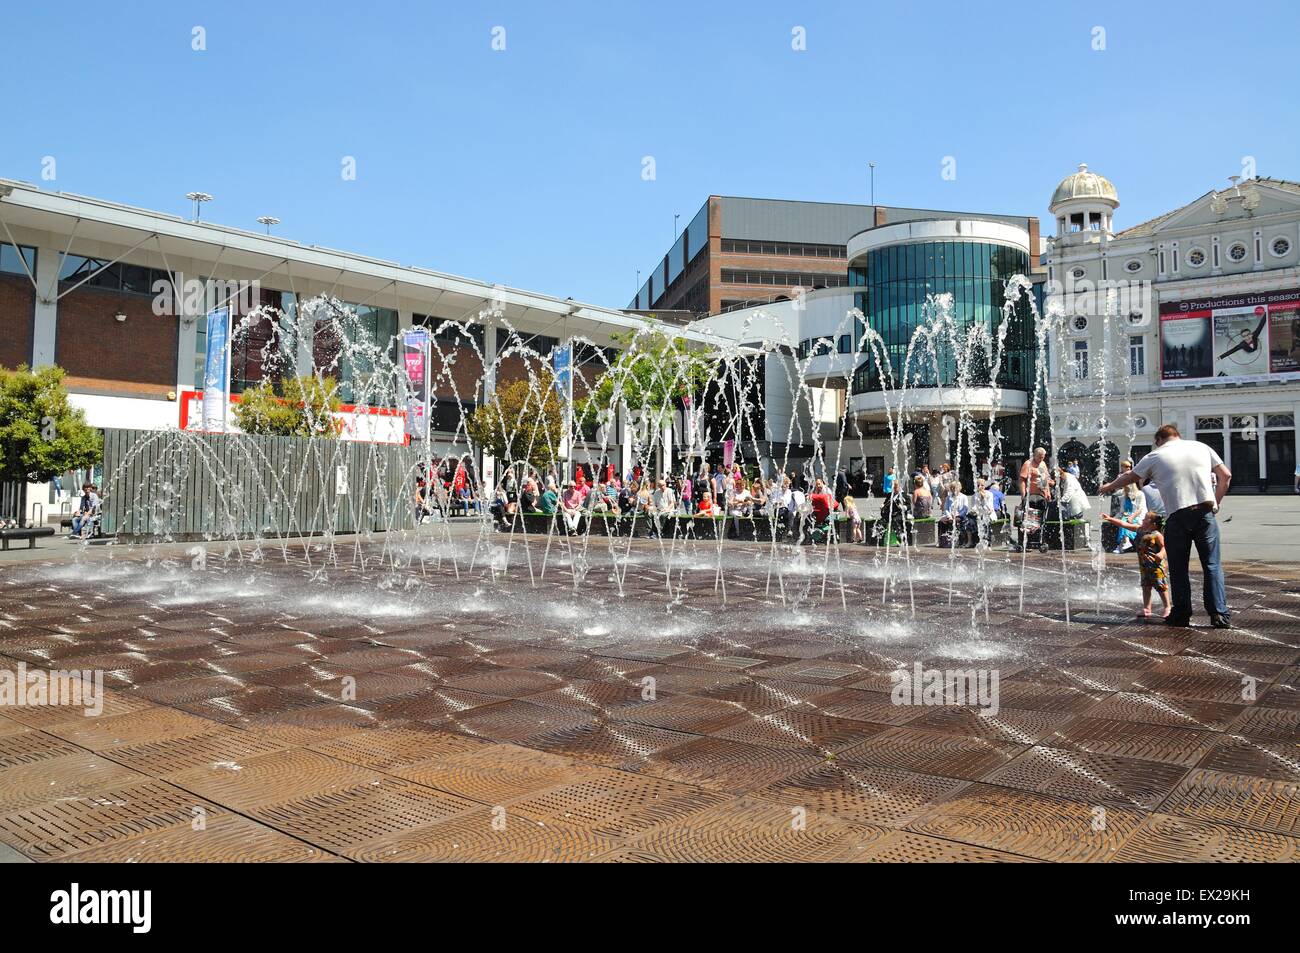 The Playhouse Theatre in Williamson Square with fountains in the foreground and people enjoying the Summer sunshine, Liverpool, Stock Photo